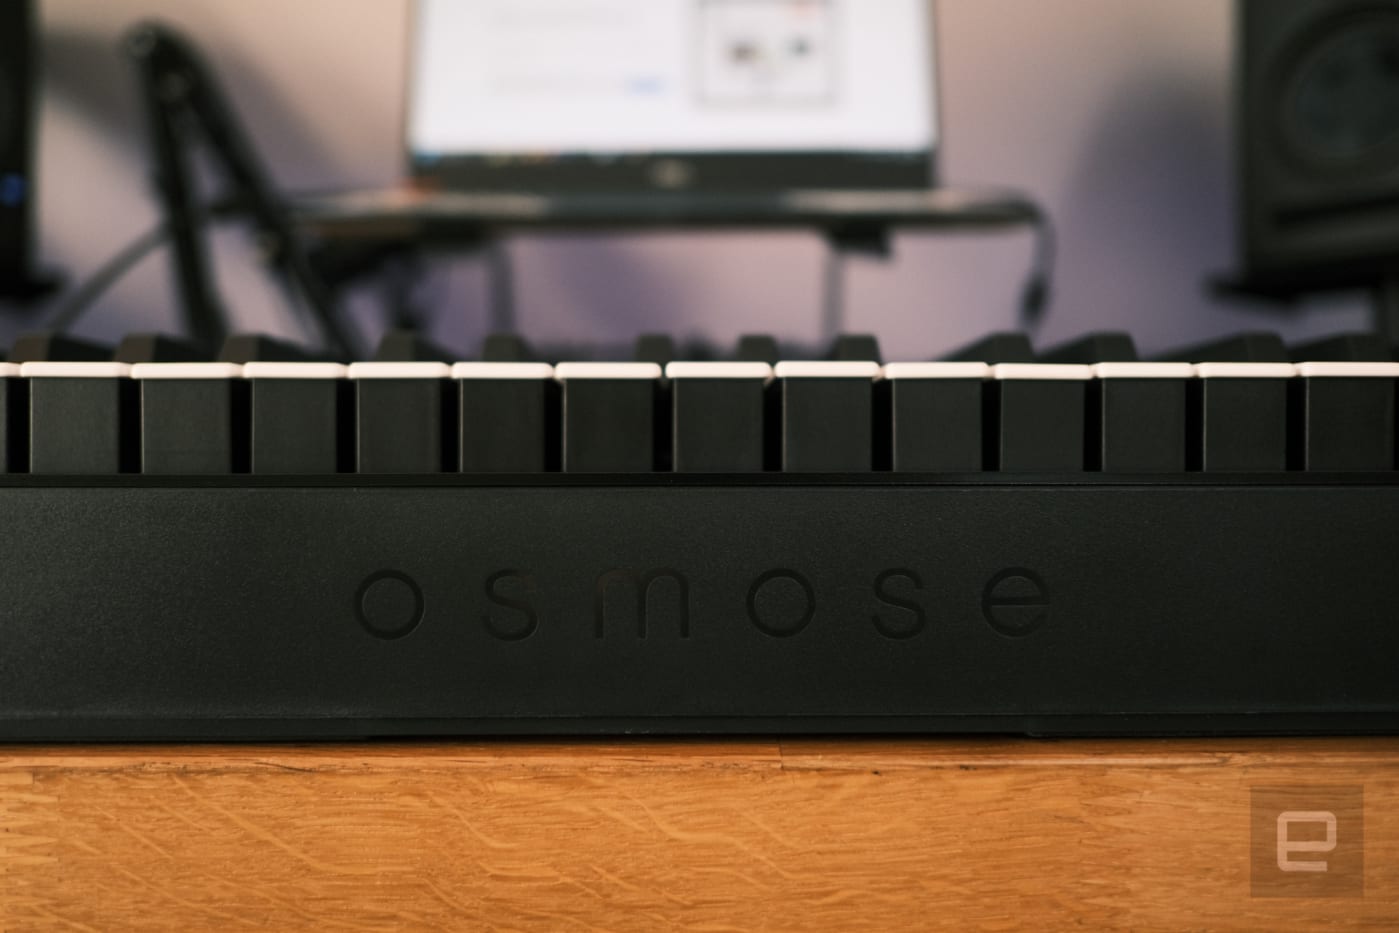 Expressive E Osmose review: A game-changing MPE keyboard, but a frustrating synthesizer